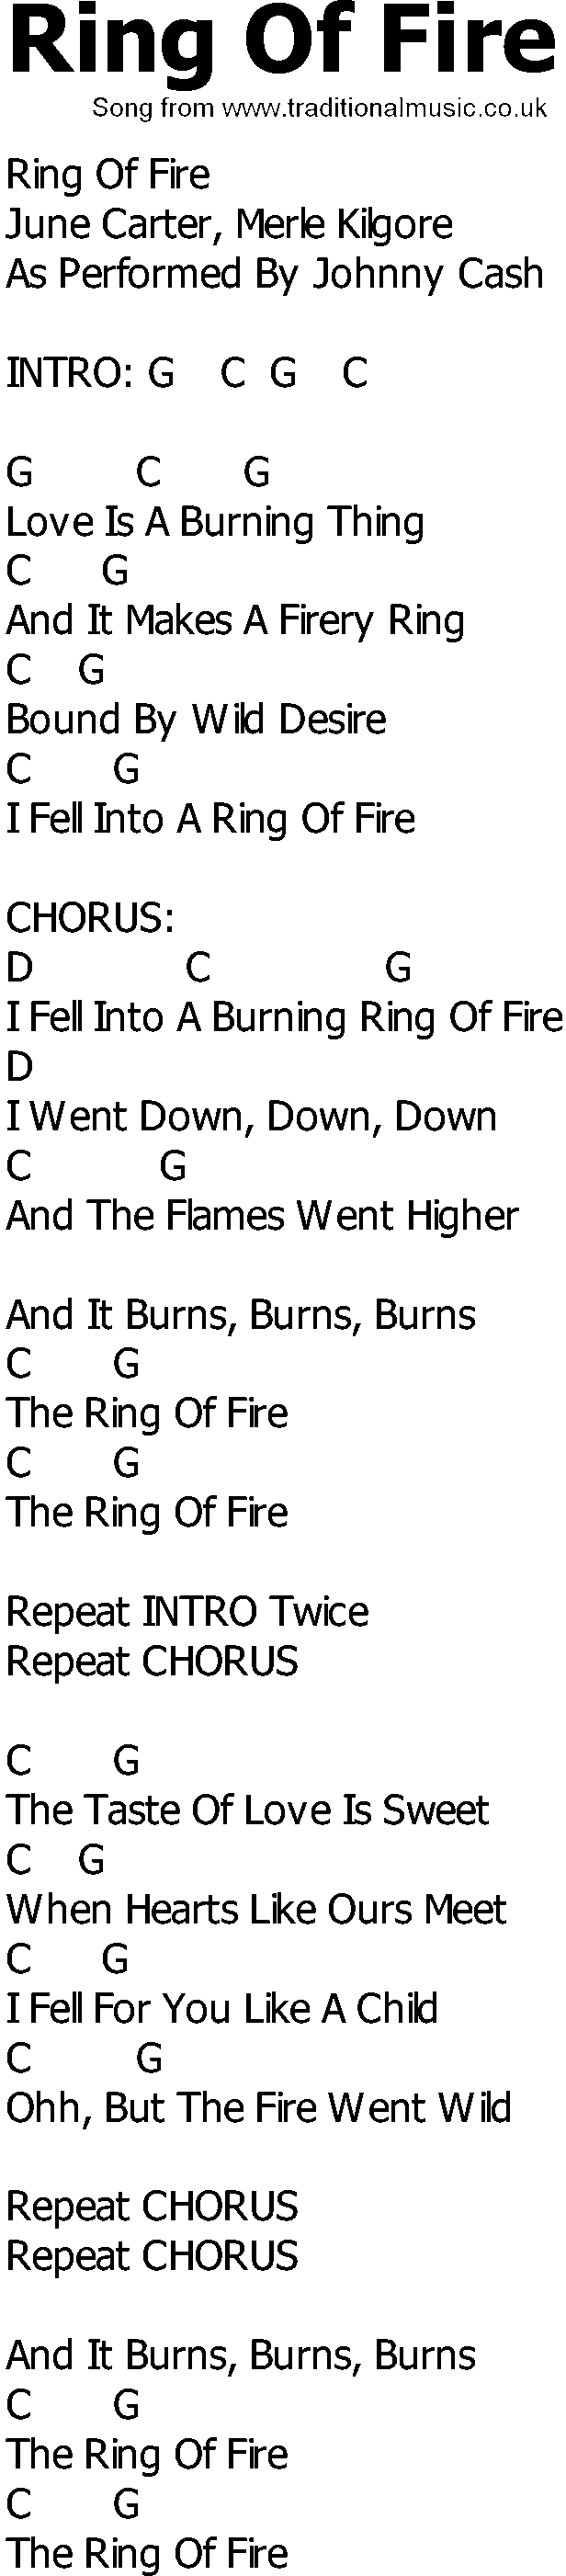 Old Country song lyrics with chords - Ring Of Fire